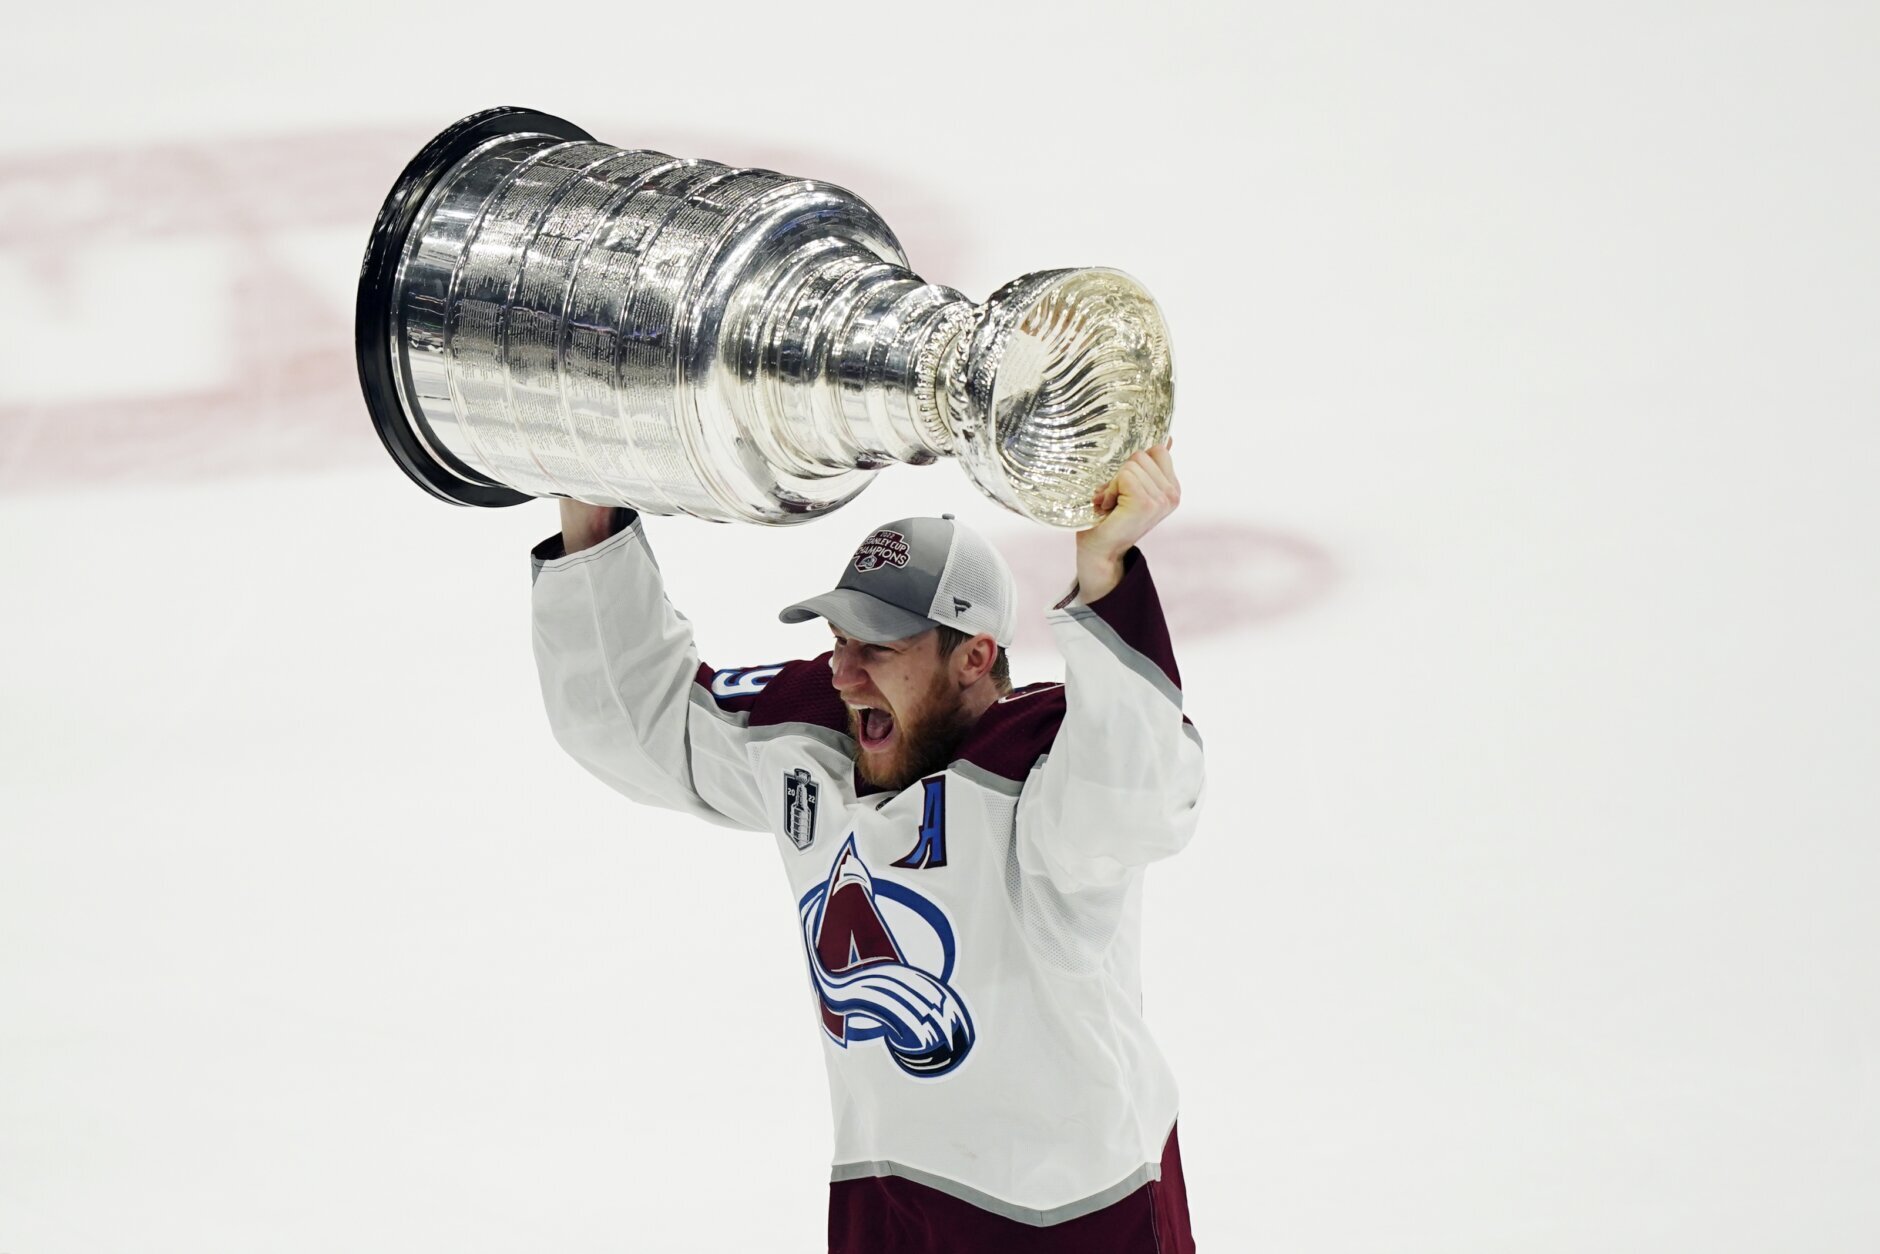 From the Avalanche down, there's 'never an easy night' in the NHL's Central  Division, National